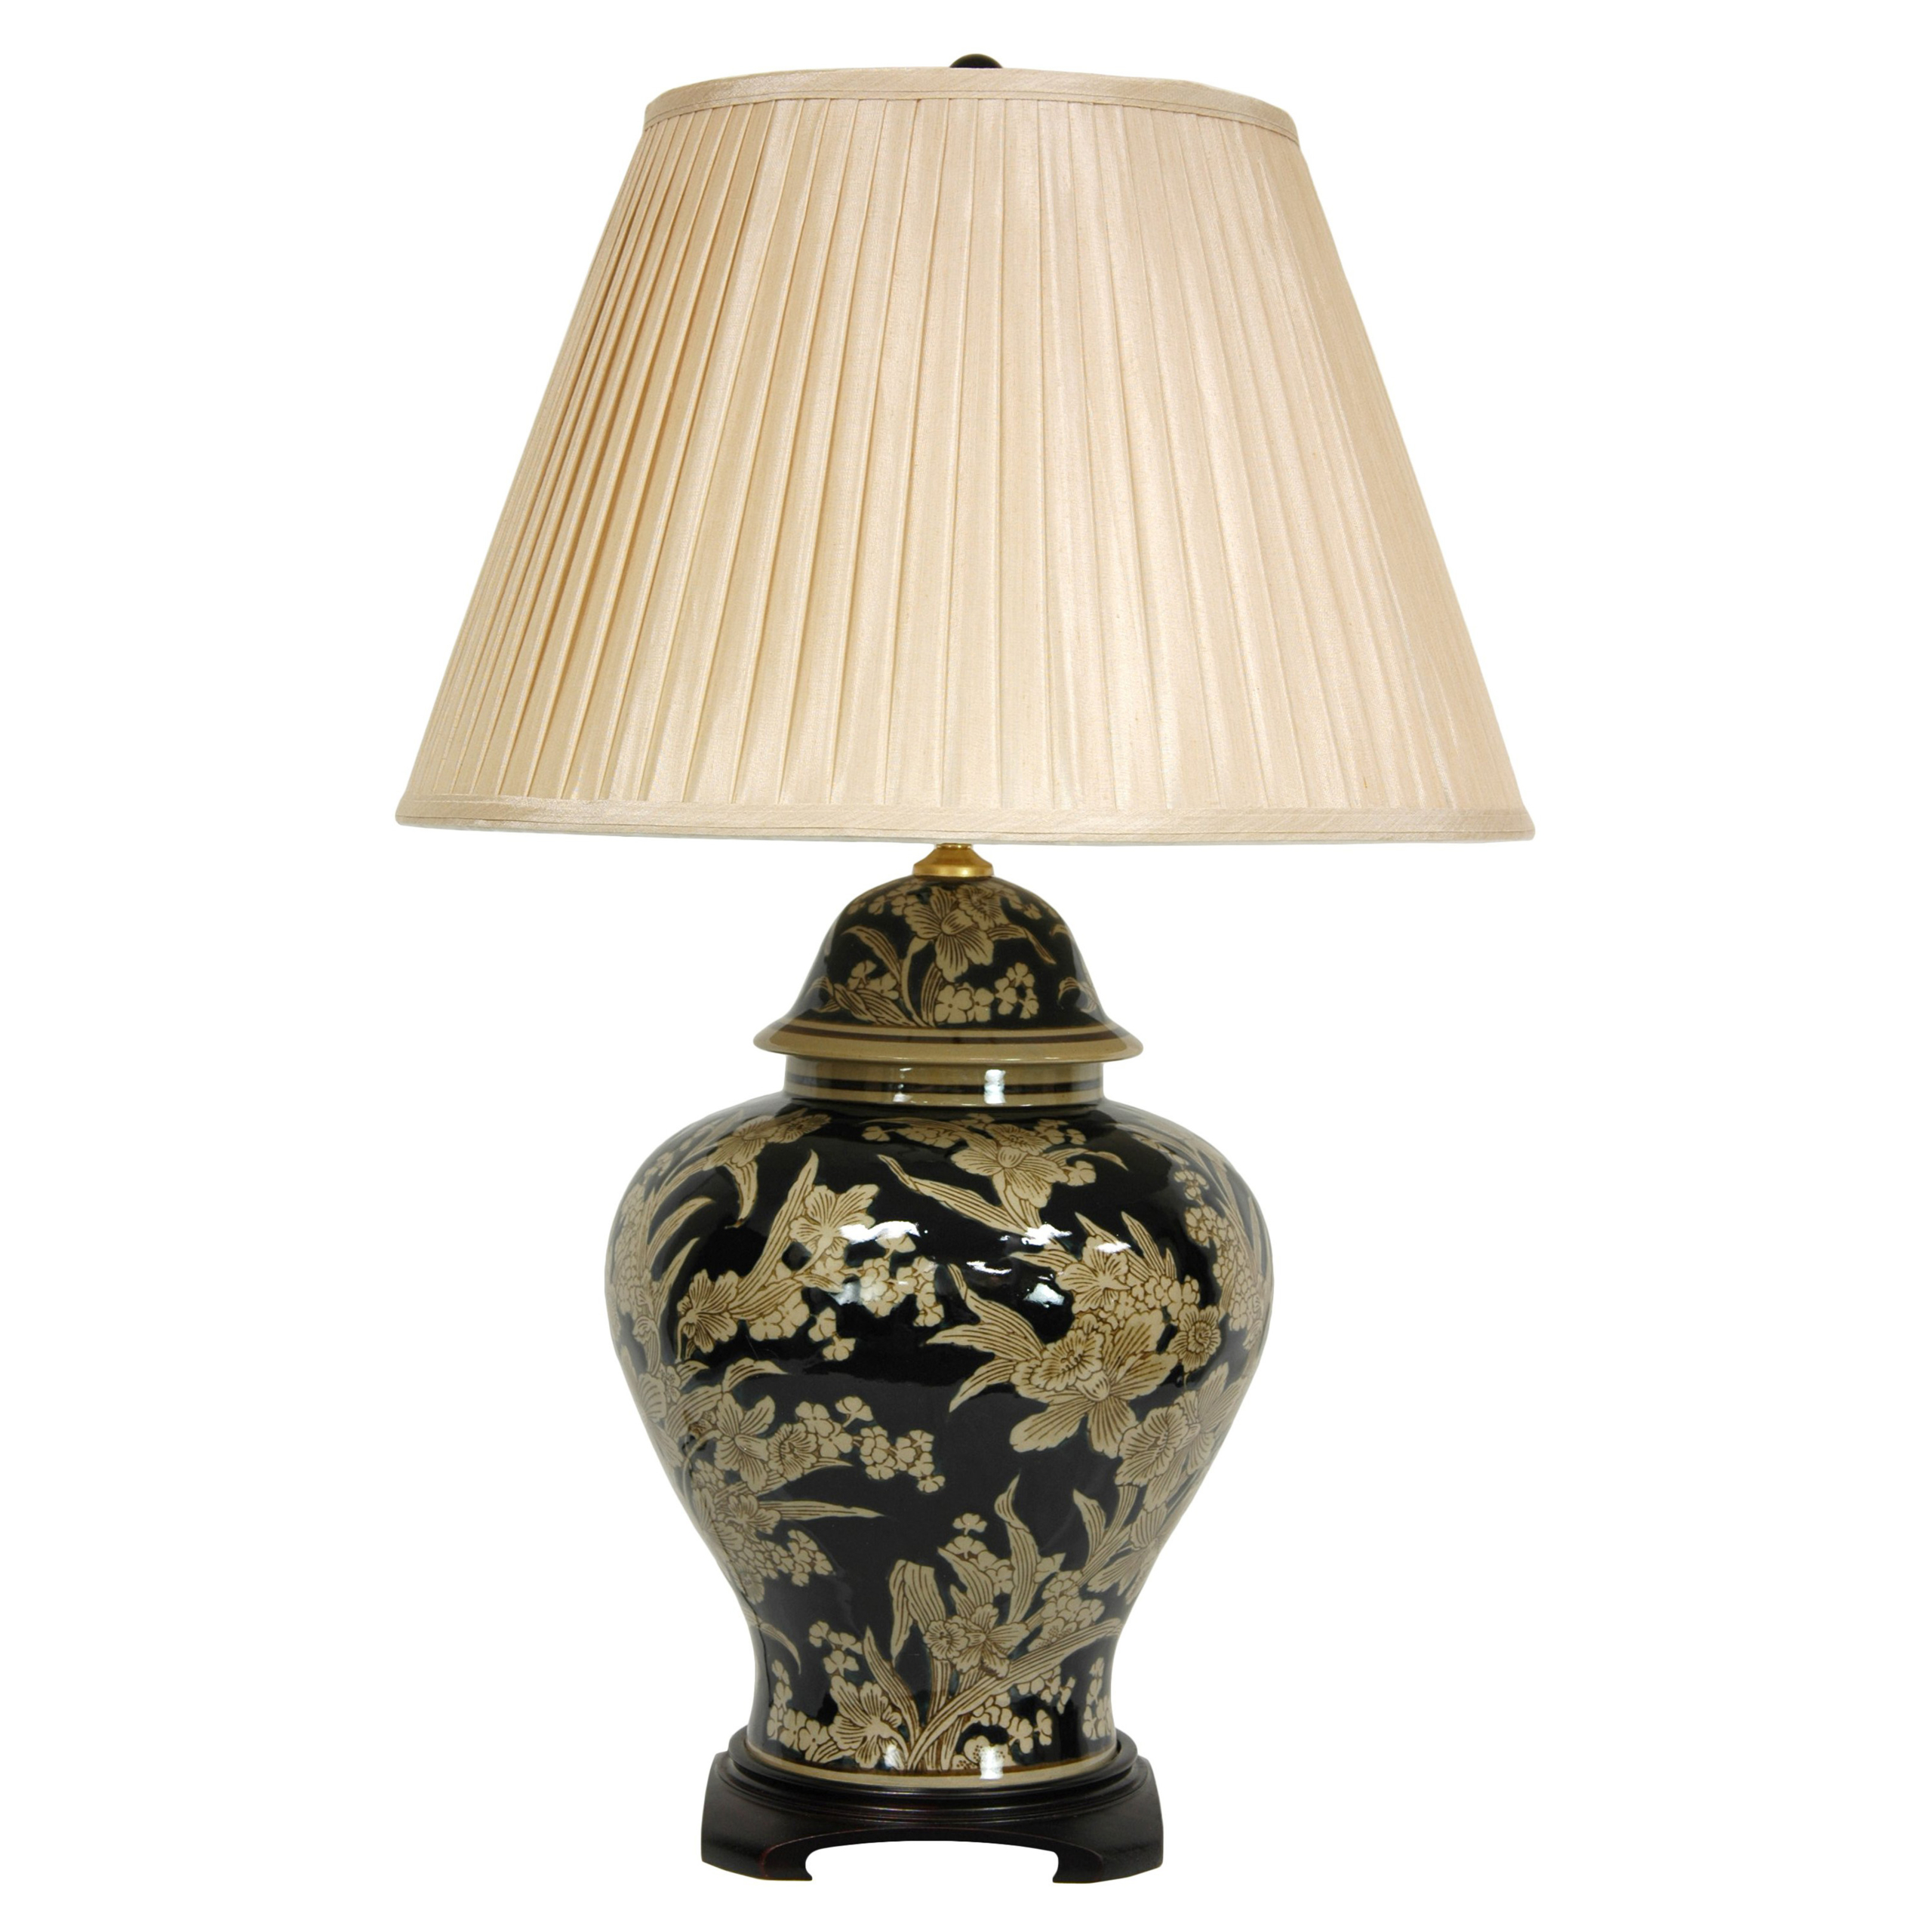 Oriental Furniture Classic Chinese Design, 28-Inch Black and Tan Floral Bouquet Oriental Lamp